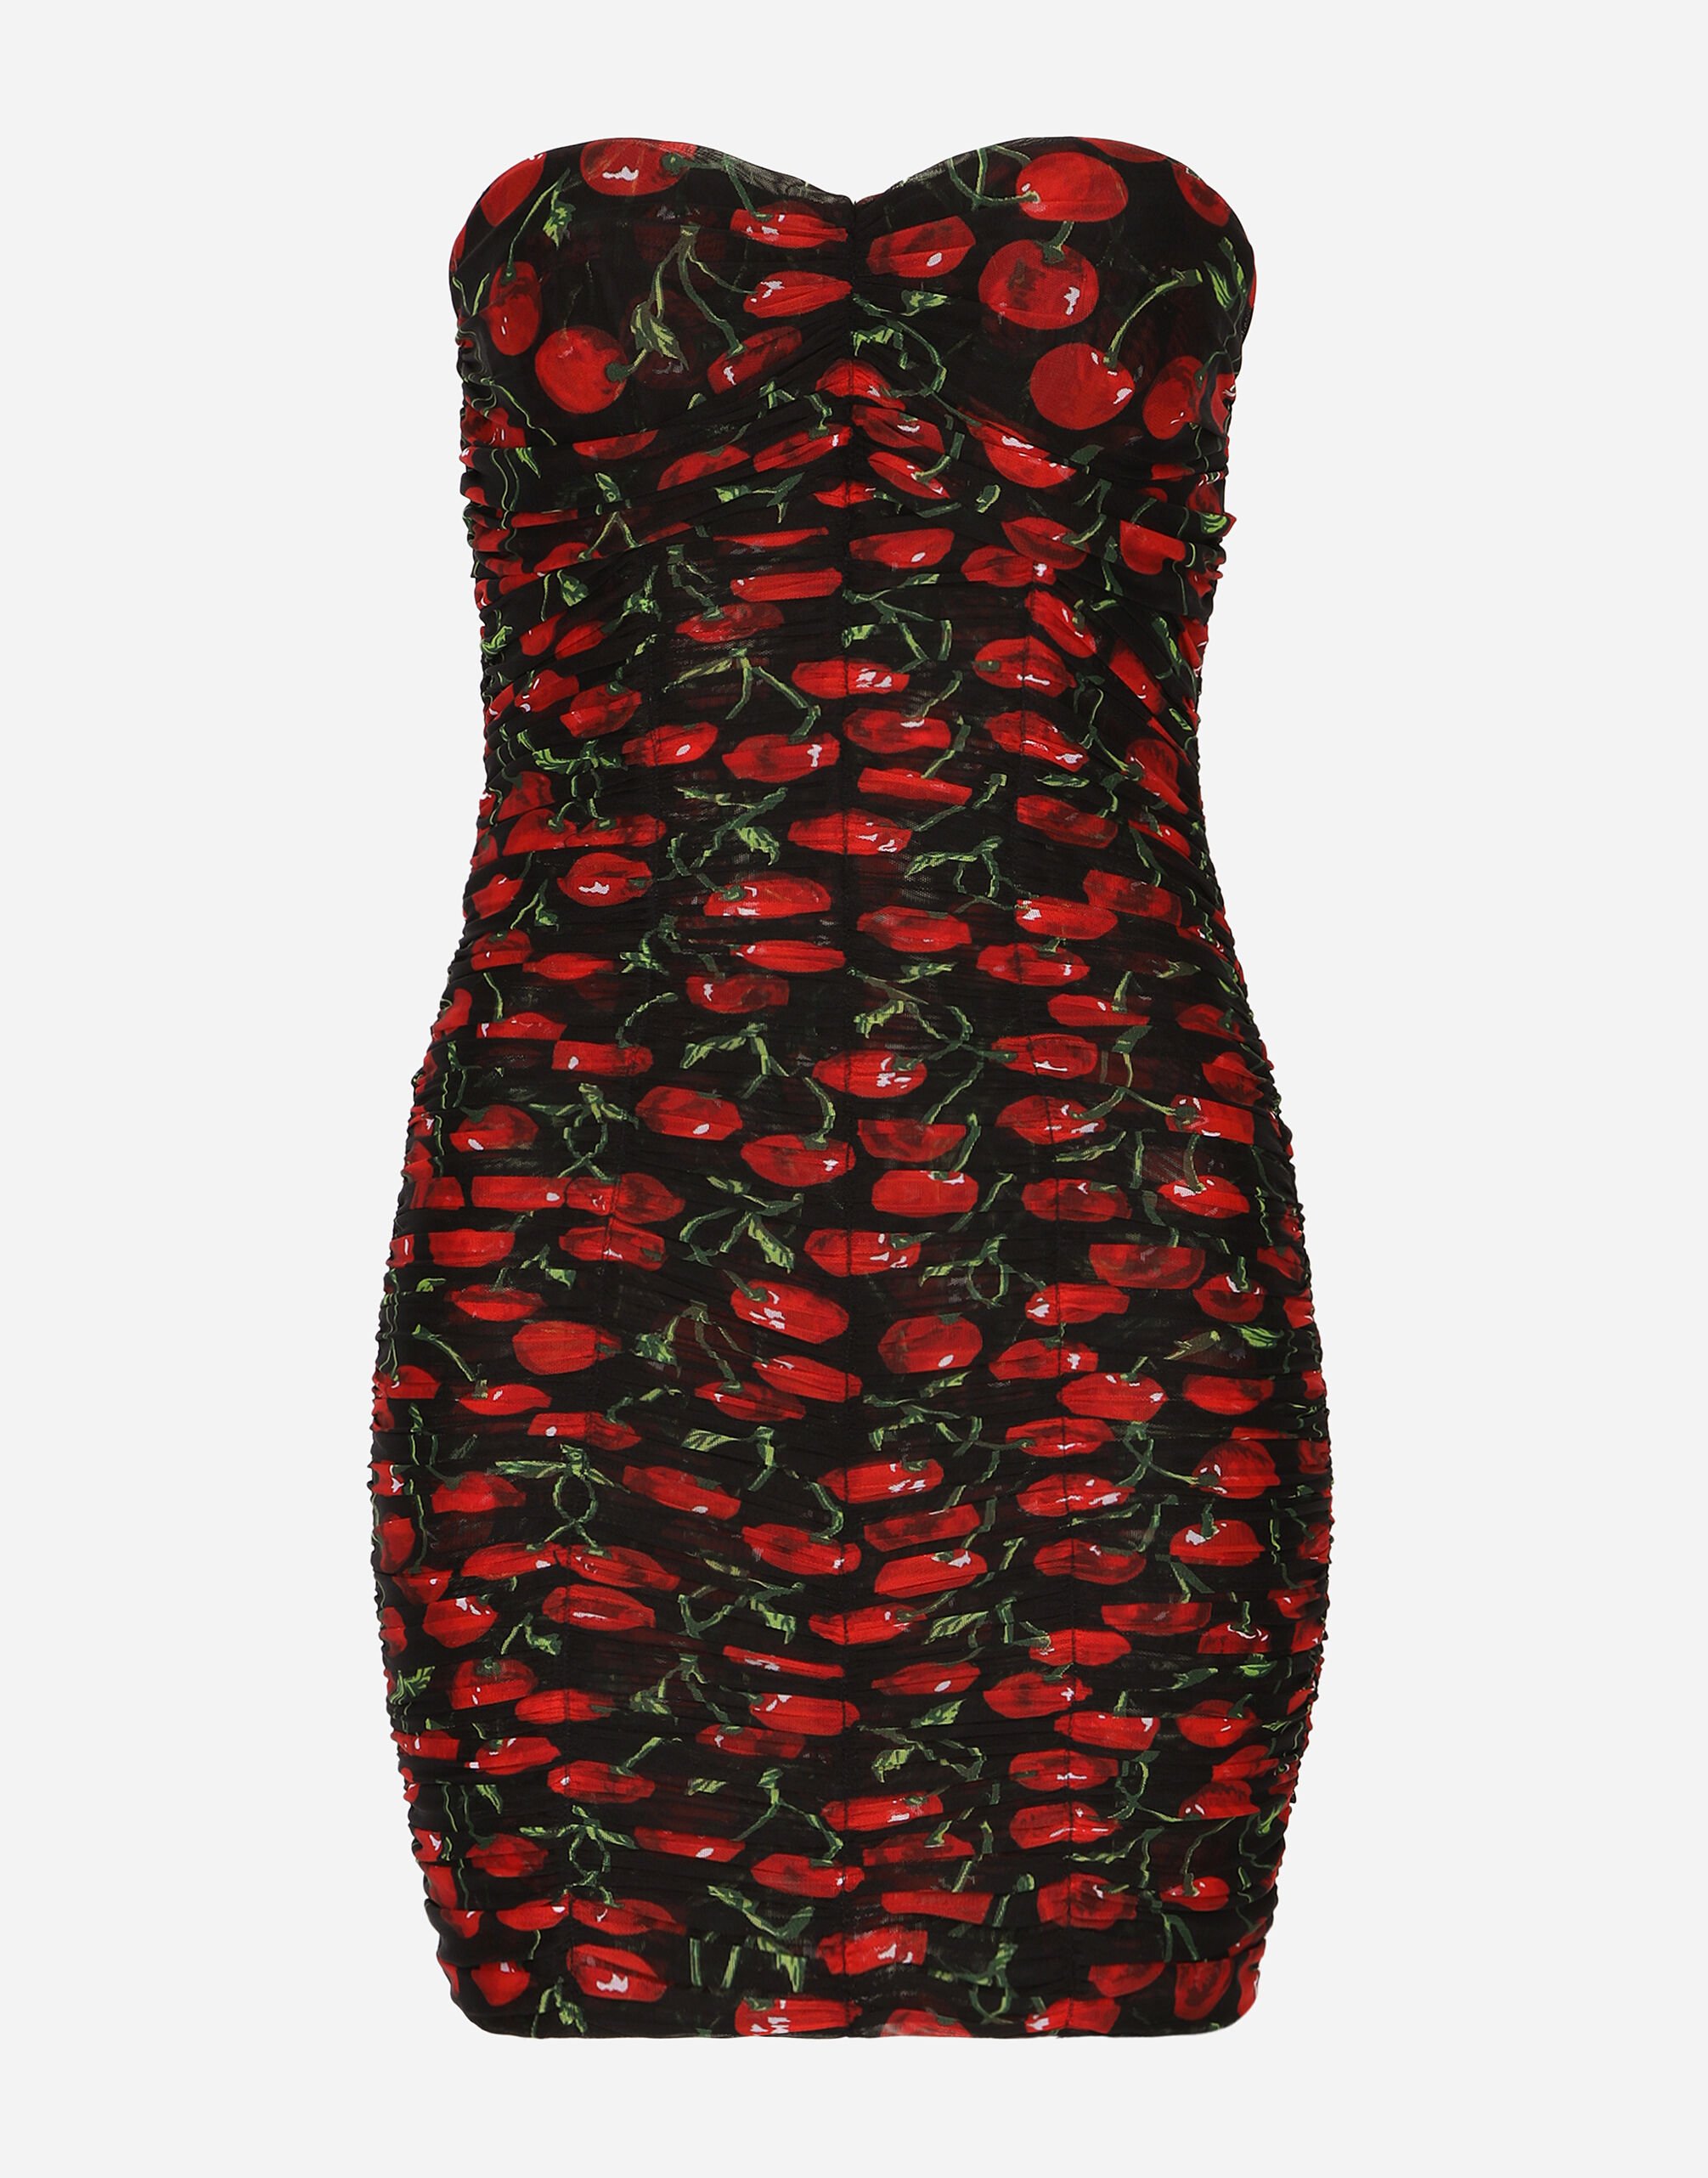 Dolce & Gabbana Cherry-print tulle strapless dress with draping Black VG6186VN187